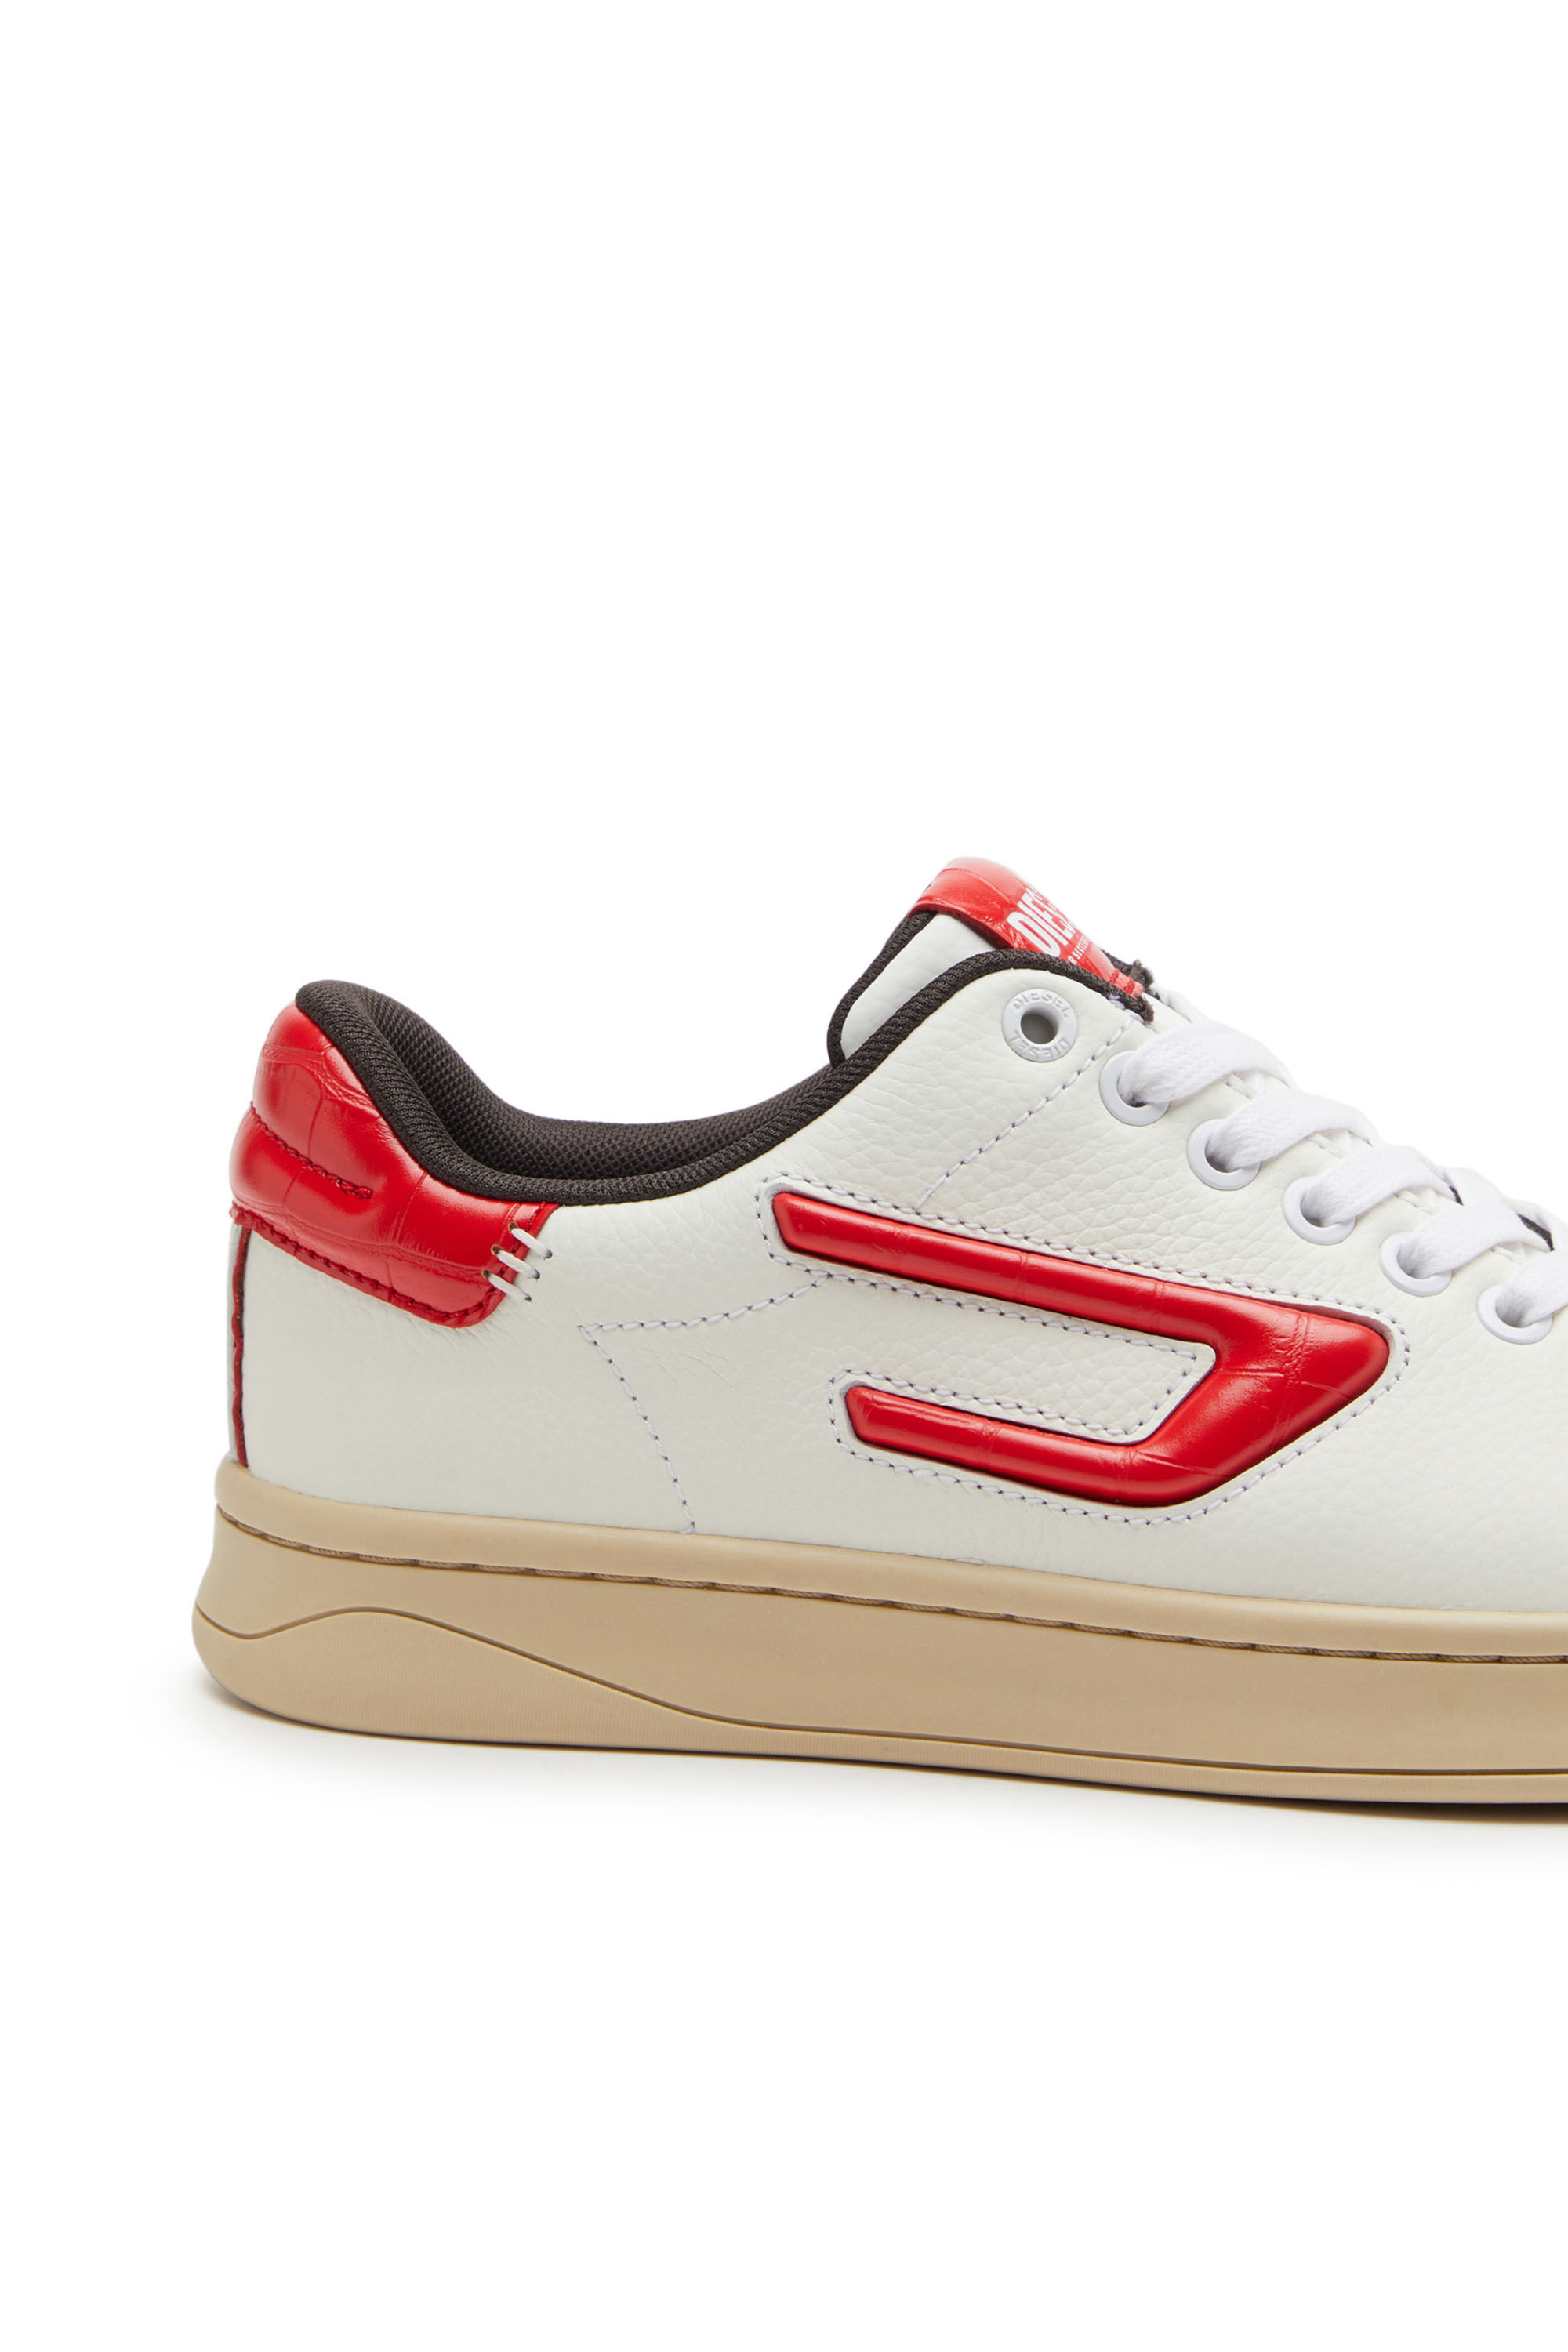 Diesel - S-ATHENE LOW W, Weiss/Rot - Image 6